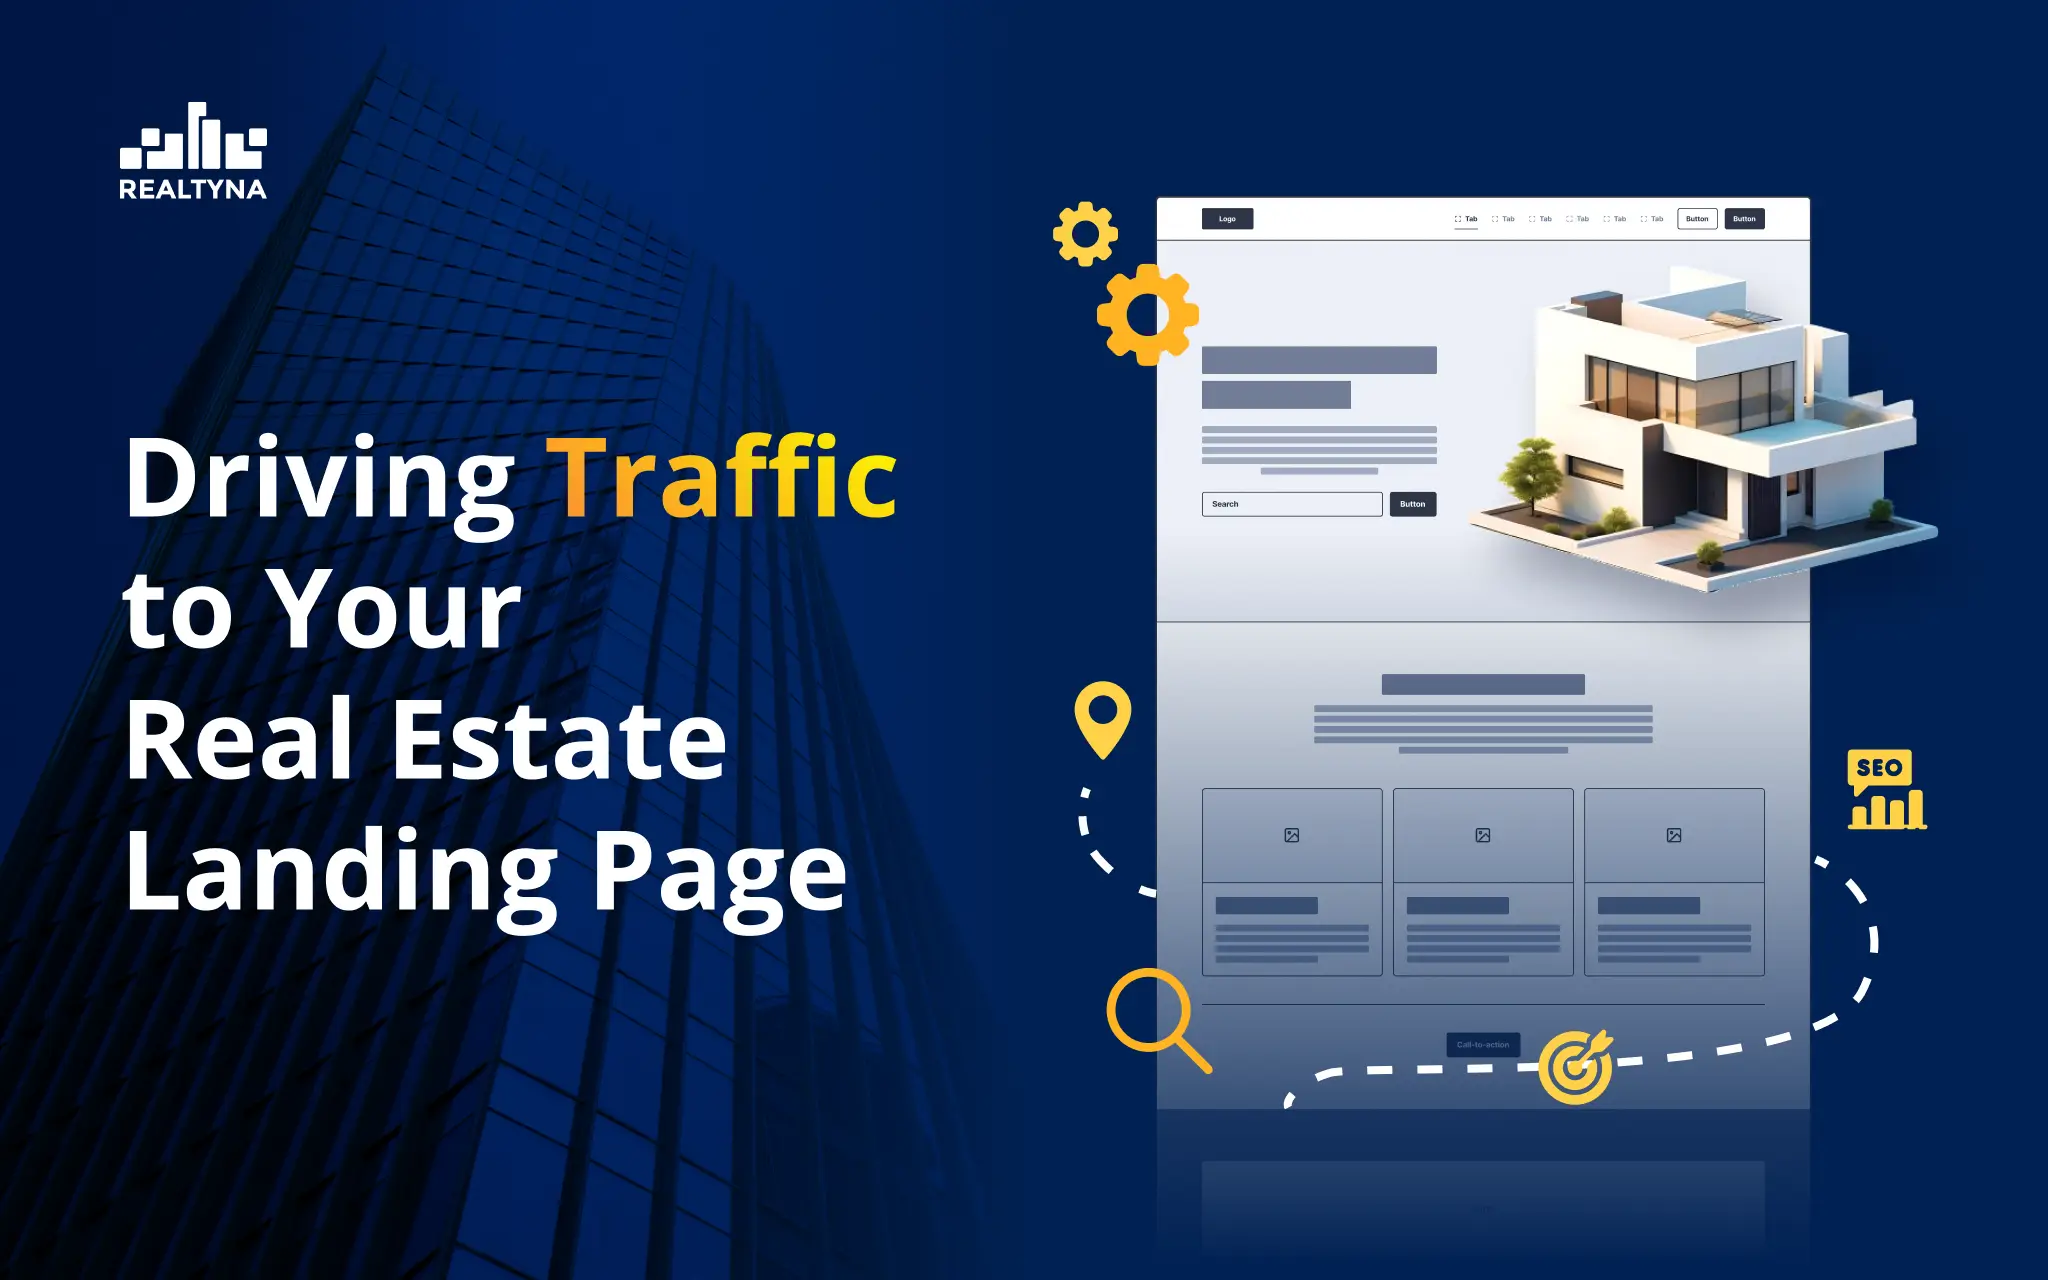 Driving Traffic to Your Real Estate Landing Page